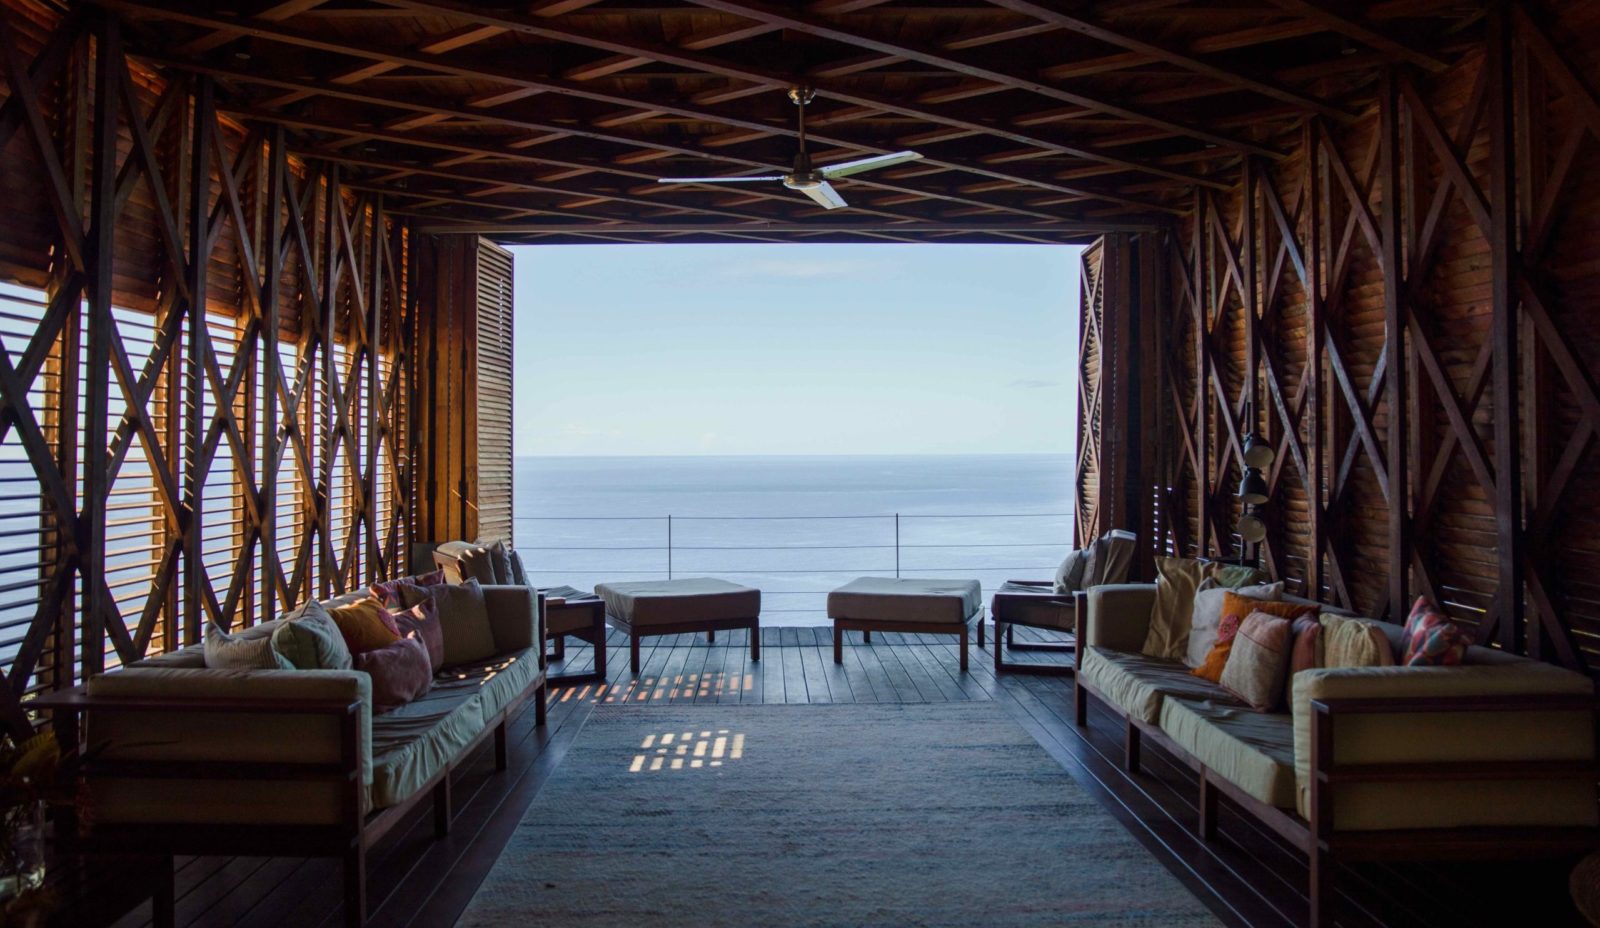 An interior view of the wooden Cantilever structure that forms the heart of Cosmos St Lucia. Showing relaxed seating and a view of the Caribbean Sea